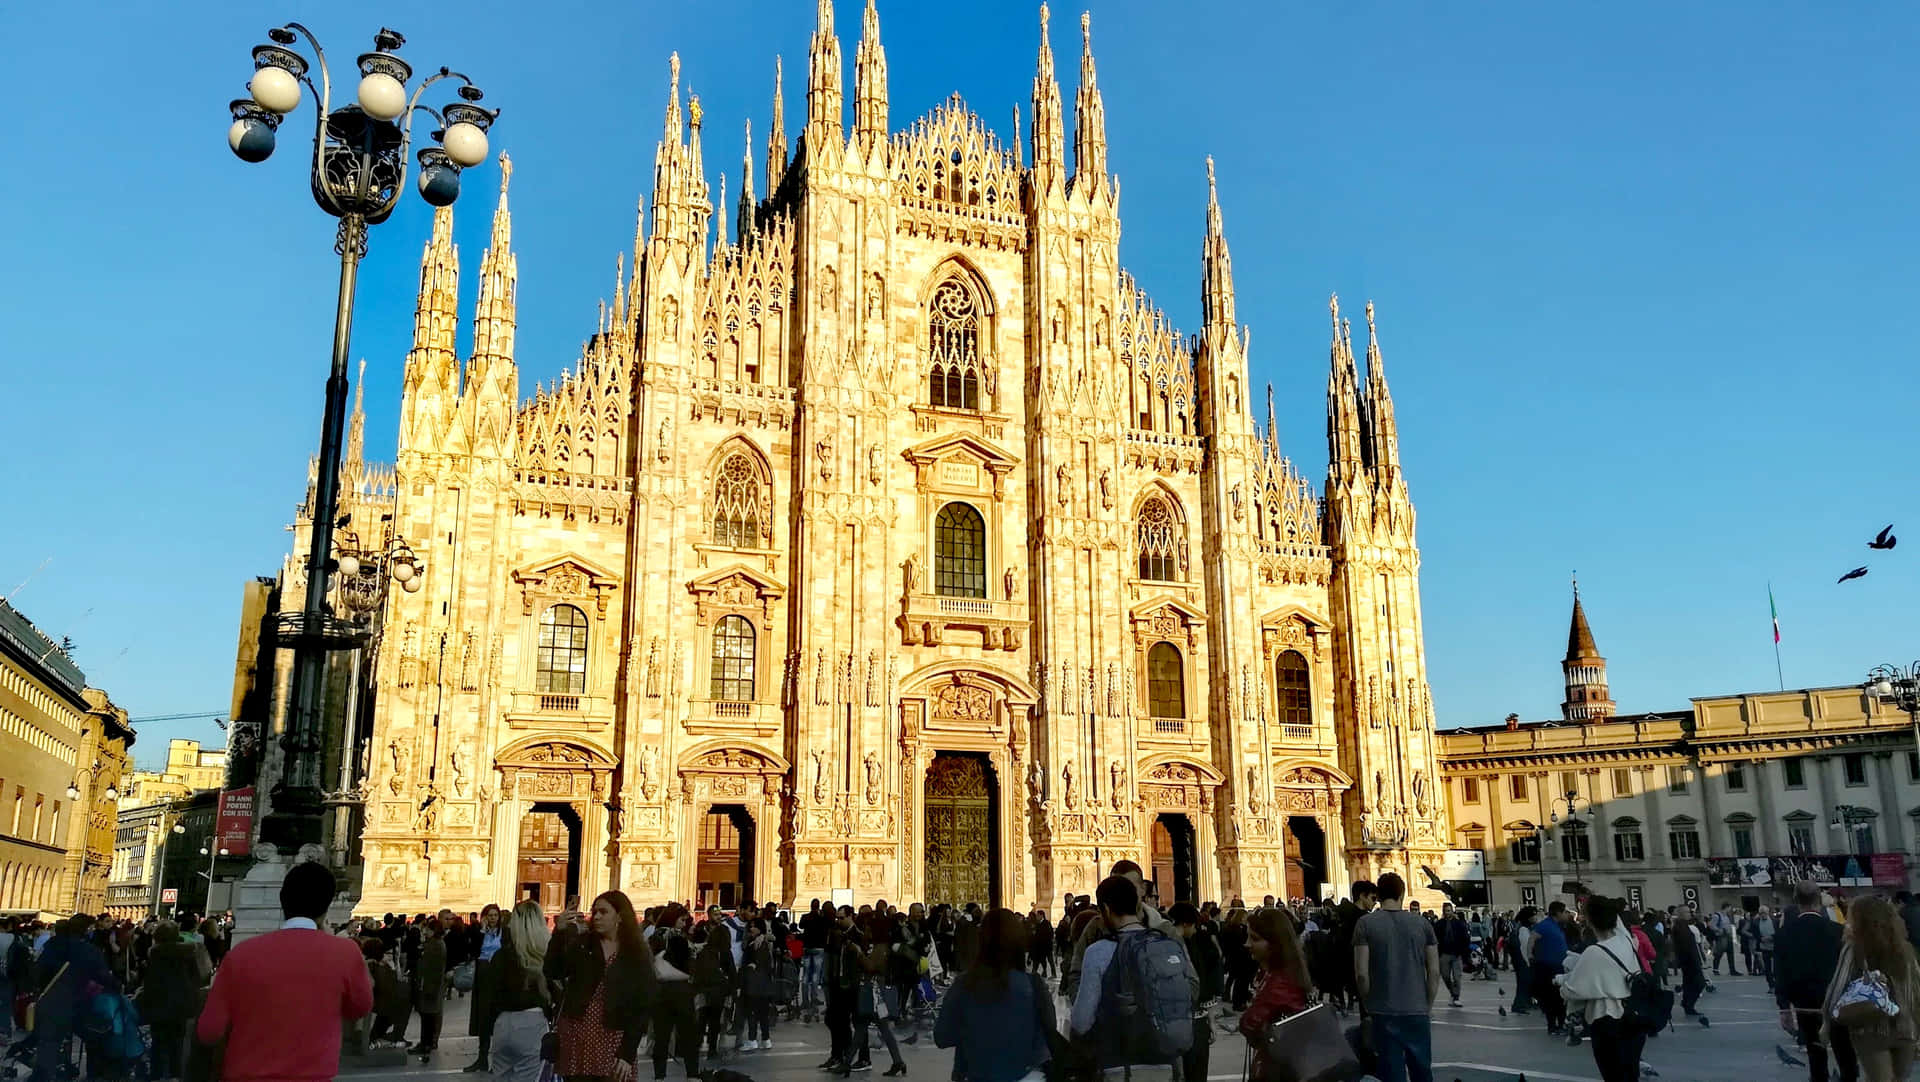 Many People On Milan Cathedral On A Sunny Day Wallpaper